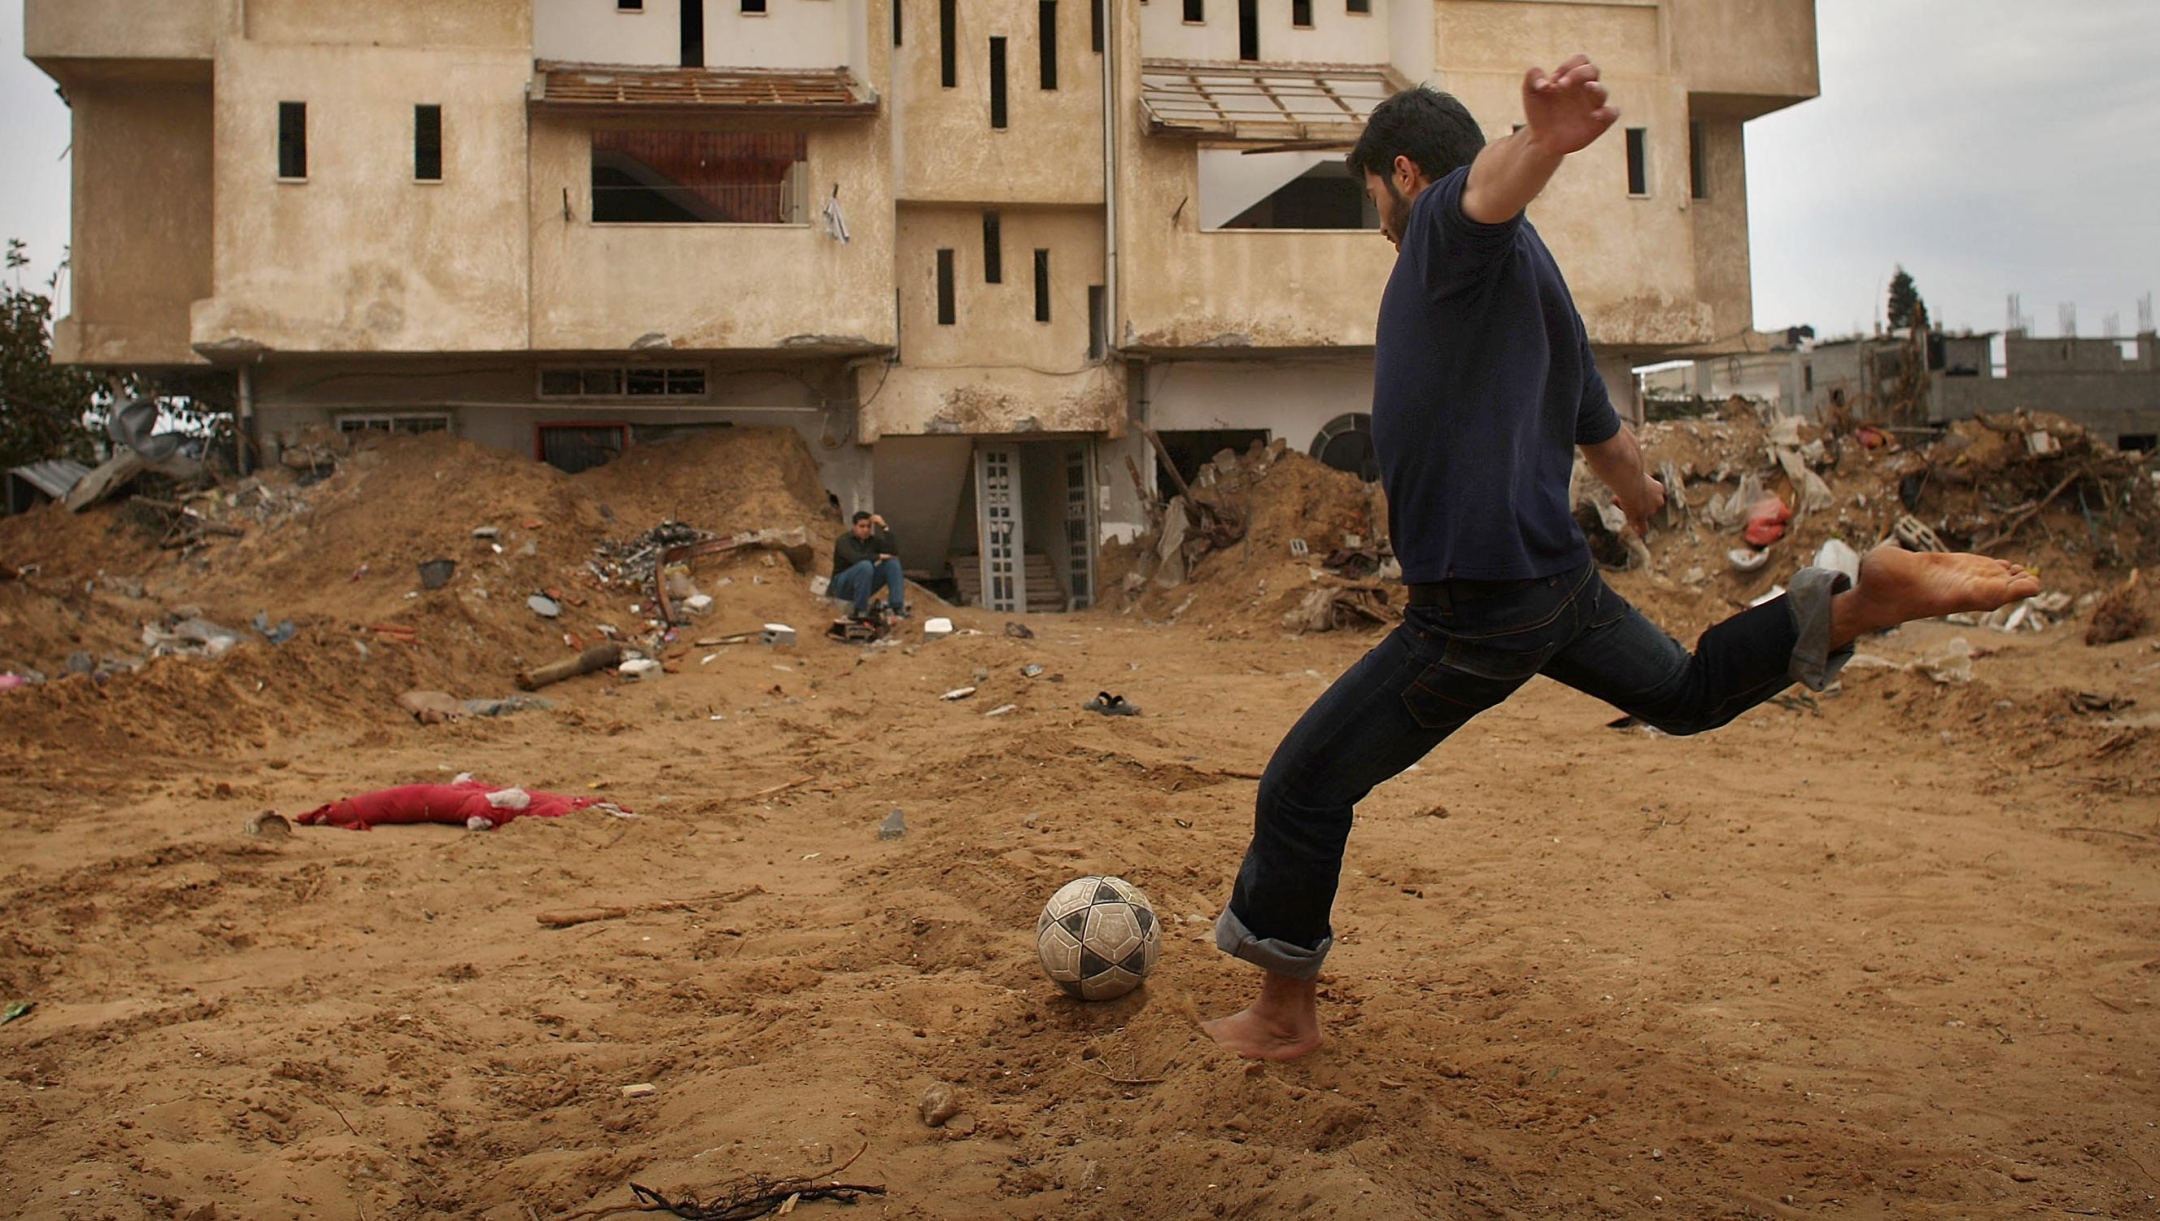 GAZA CITY, GAZA STRIP - JANUARY 23:  A teenager plays a game of soccer with friends in front of his damaged apartment building on January 23, 2009 in a heavily damaged suburb in Gaza City, Gaza Strip. Residents of Gaza are still suffering from severe food and water shortages. According to reports, 13 Israelis and over 1300 Palestinians were killed in the Mideast conflict.  (Photo by Spencer Platt/Getty Images)